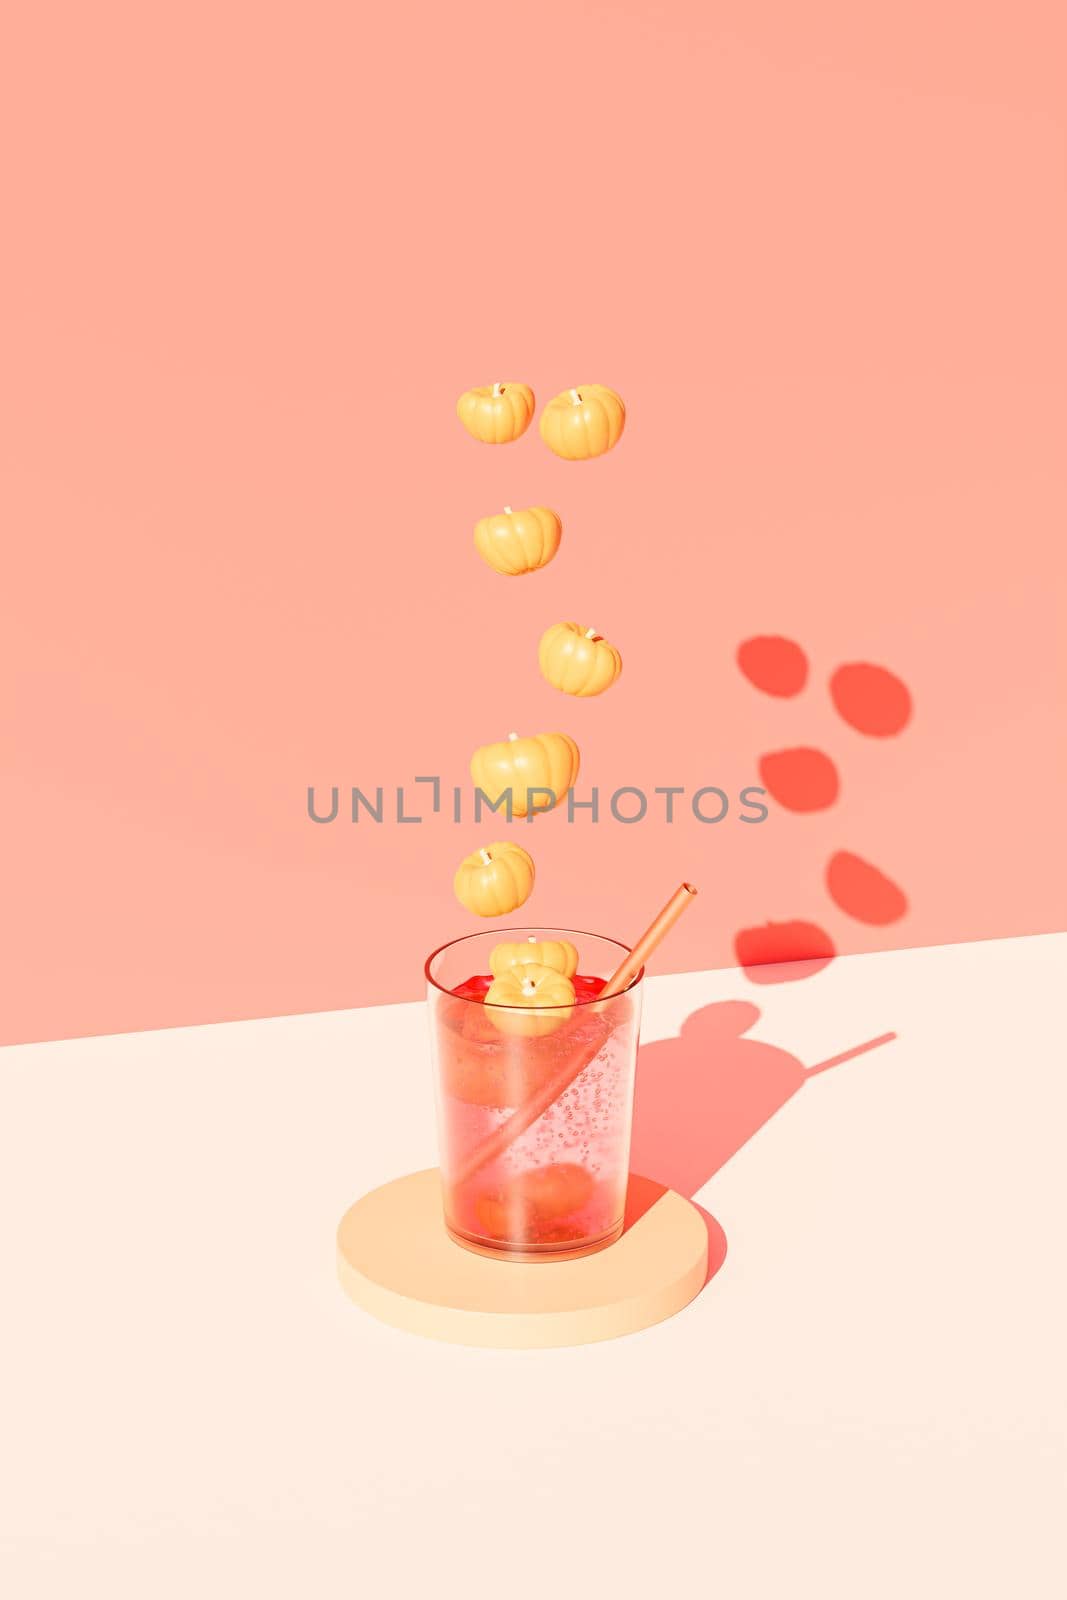 Drink in glass with pumpkins on beige background for advertising on autumn holidays or sales, 3d render